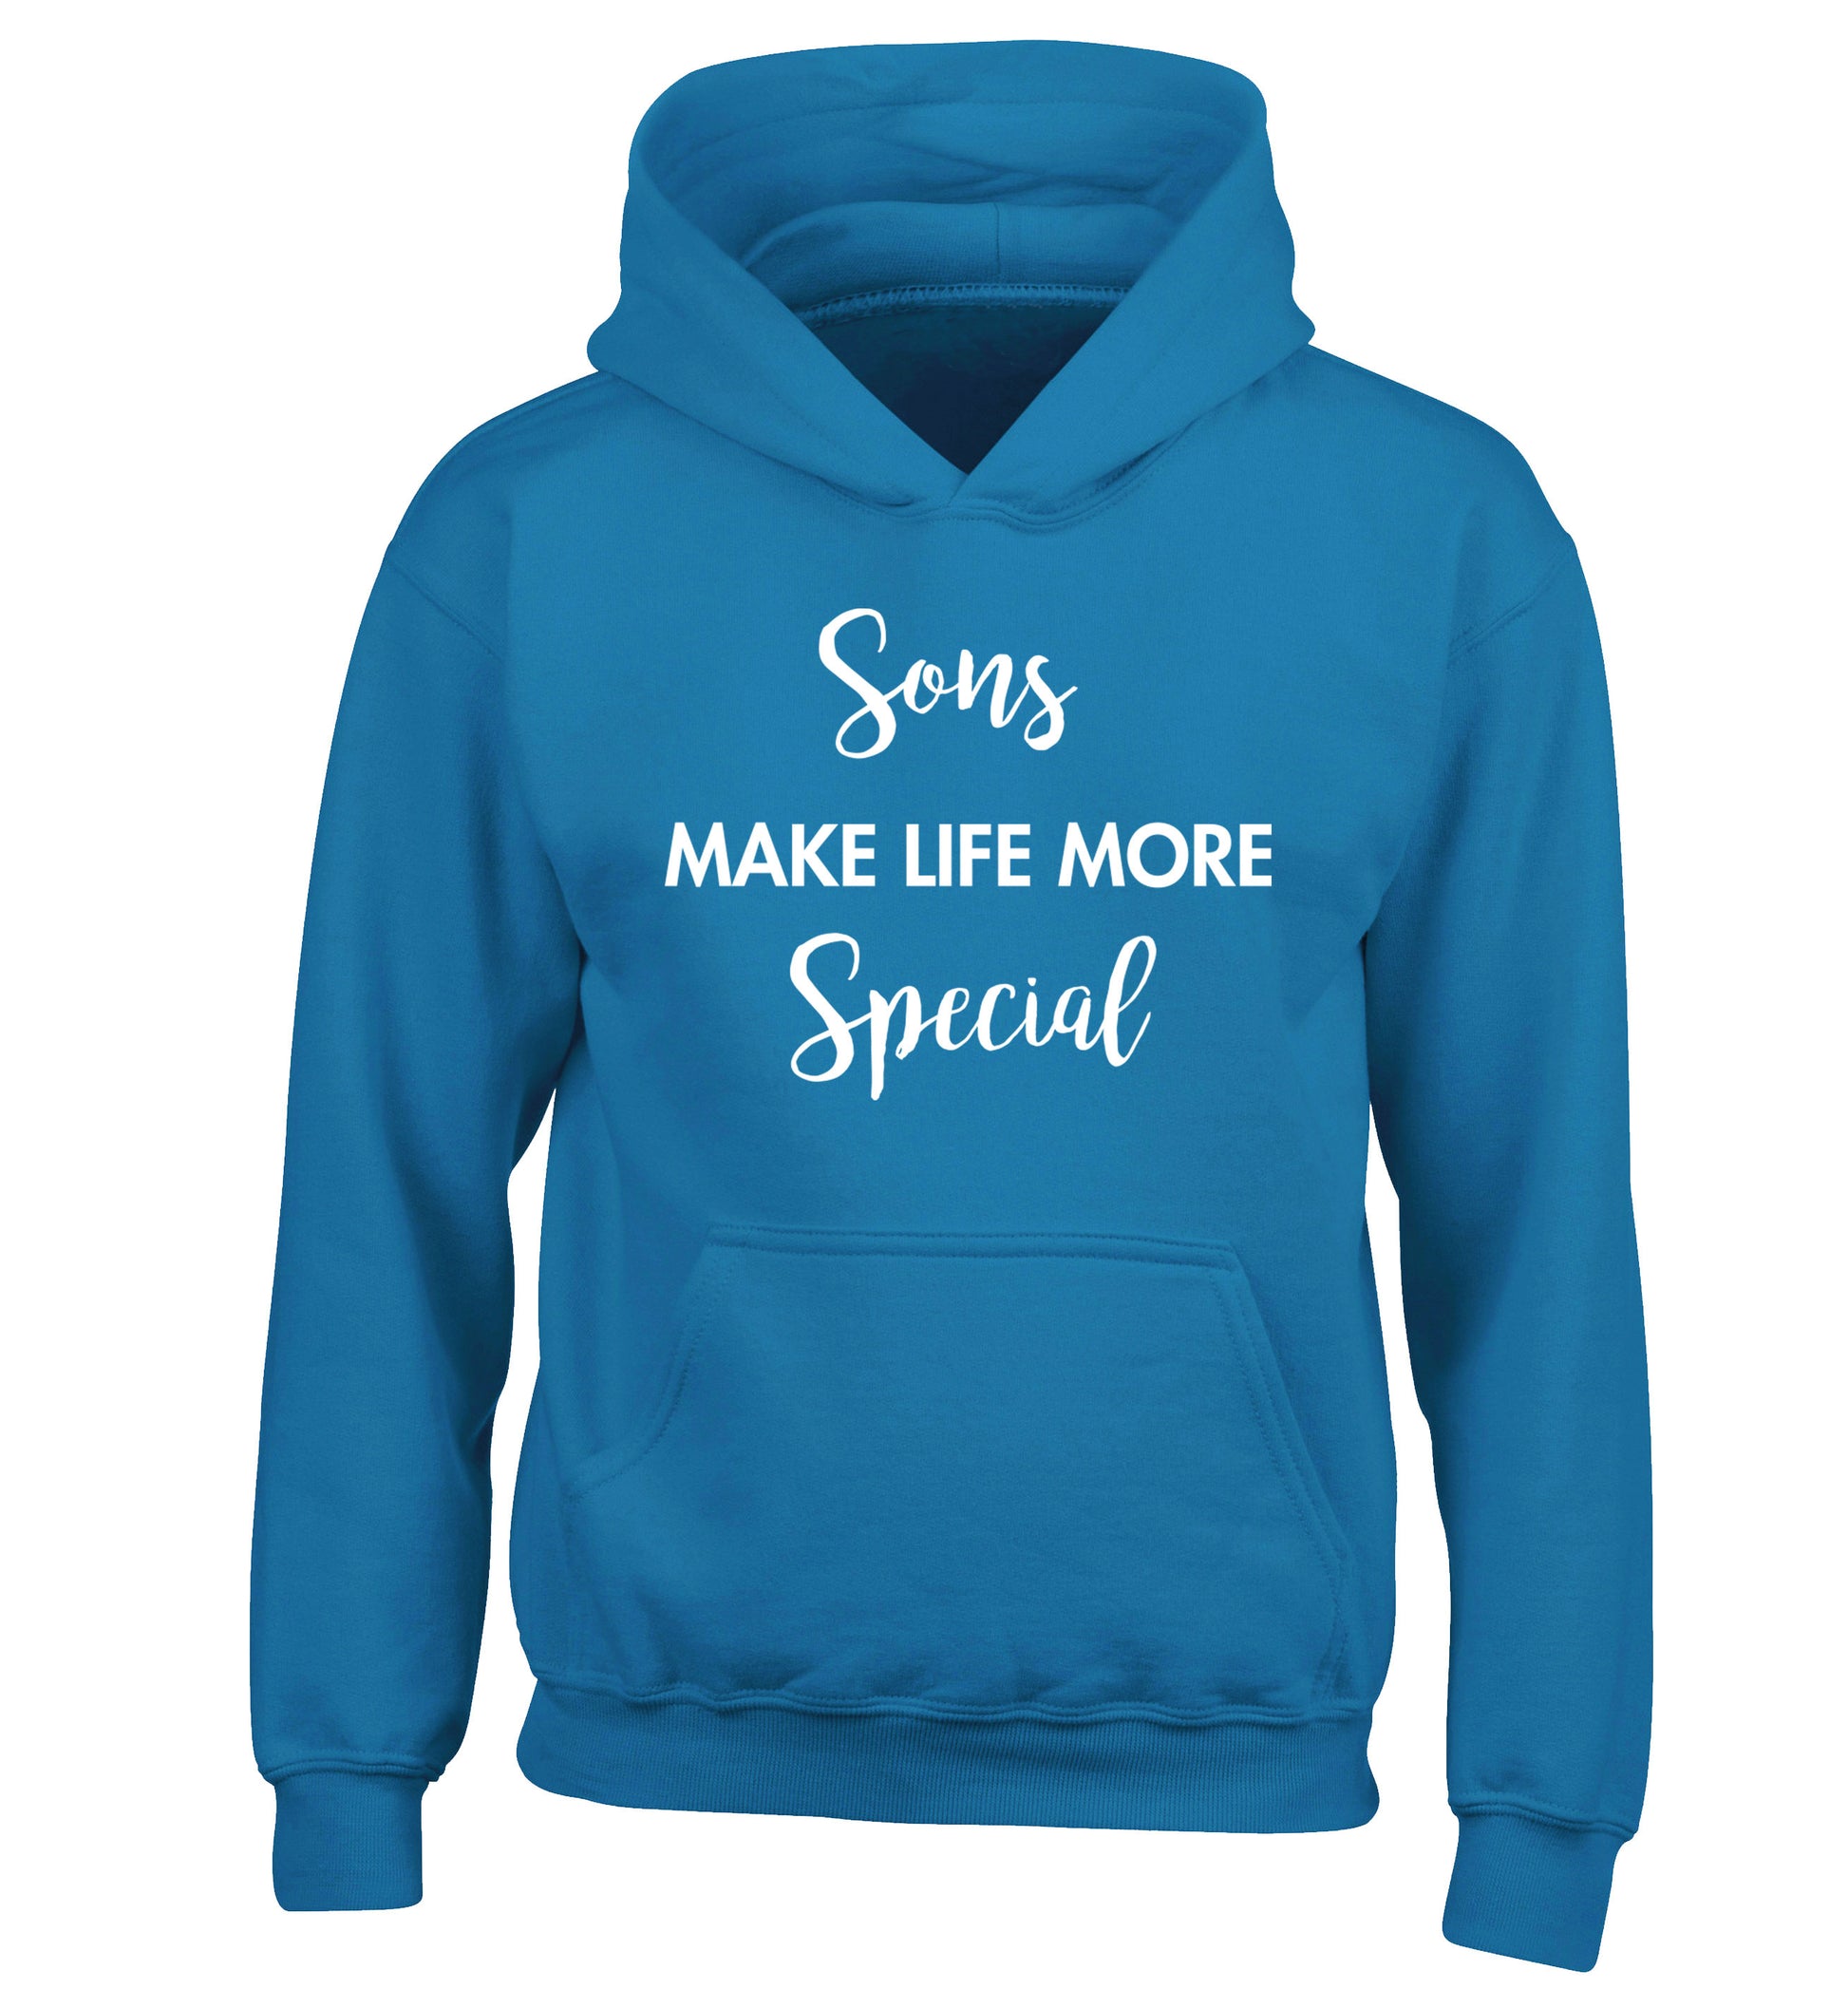 Daughters make life more special children's blue hoodie 12-14 Years